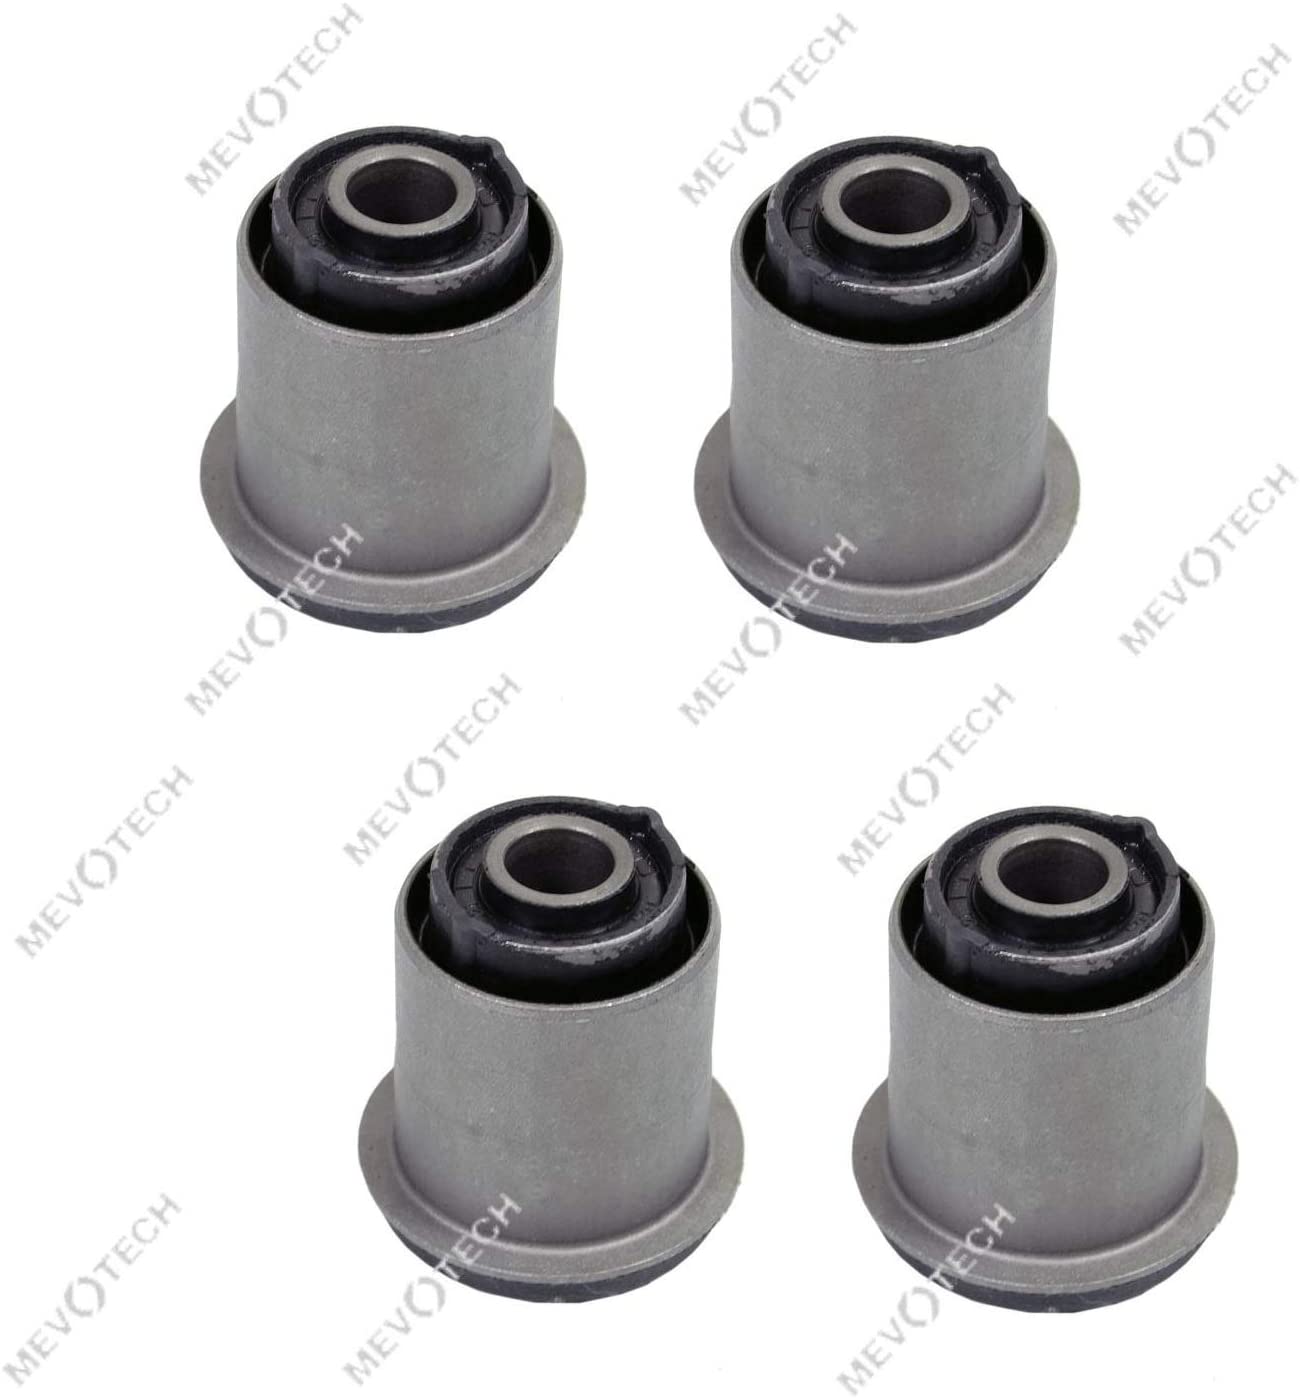 Set of 4 Front Upper Contol Arm Bushings Mevotech For Sequoia Tundra 2000-2007